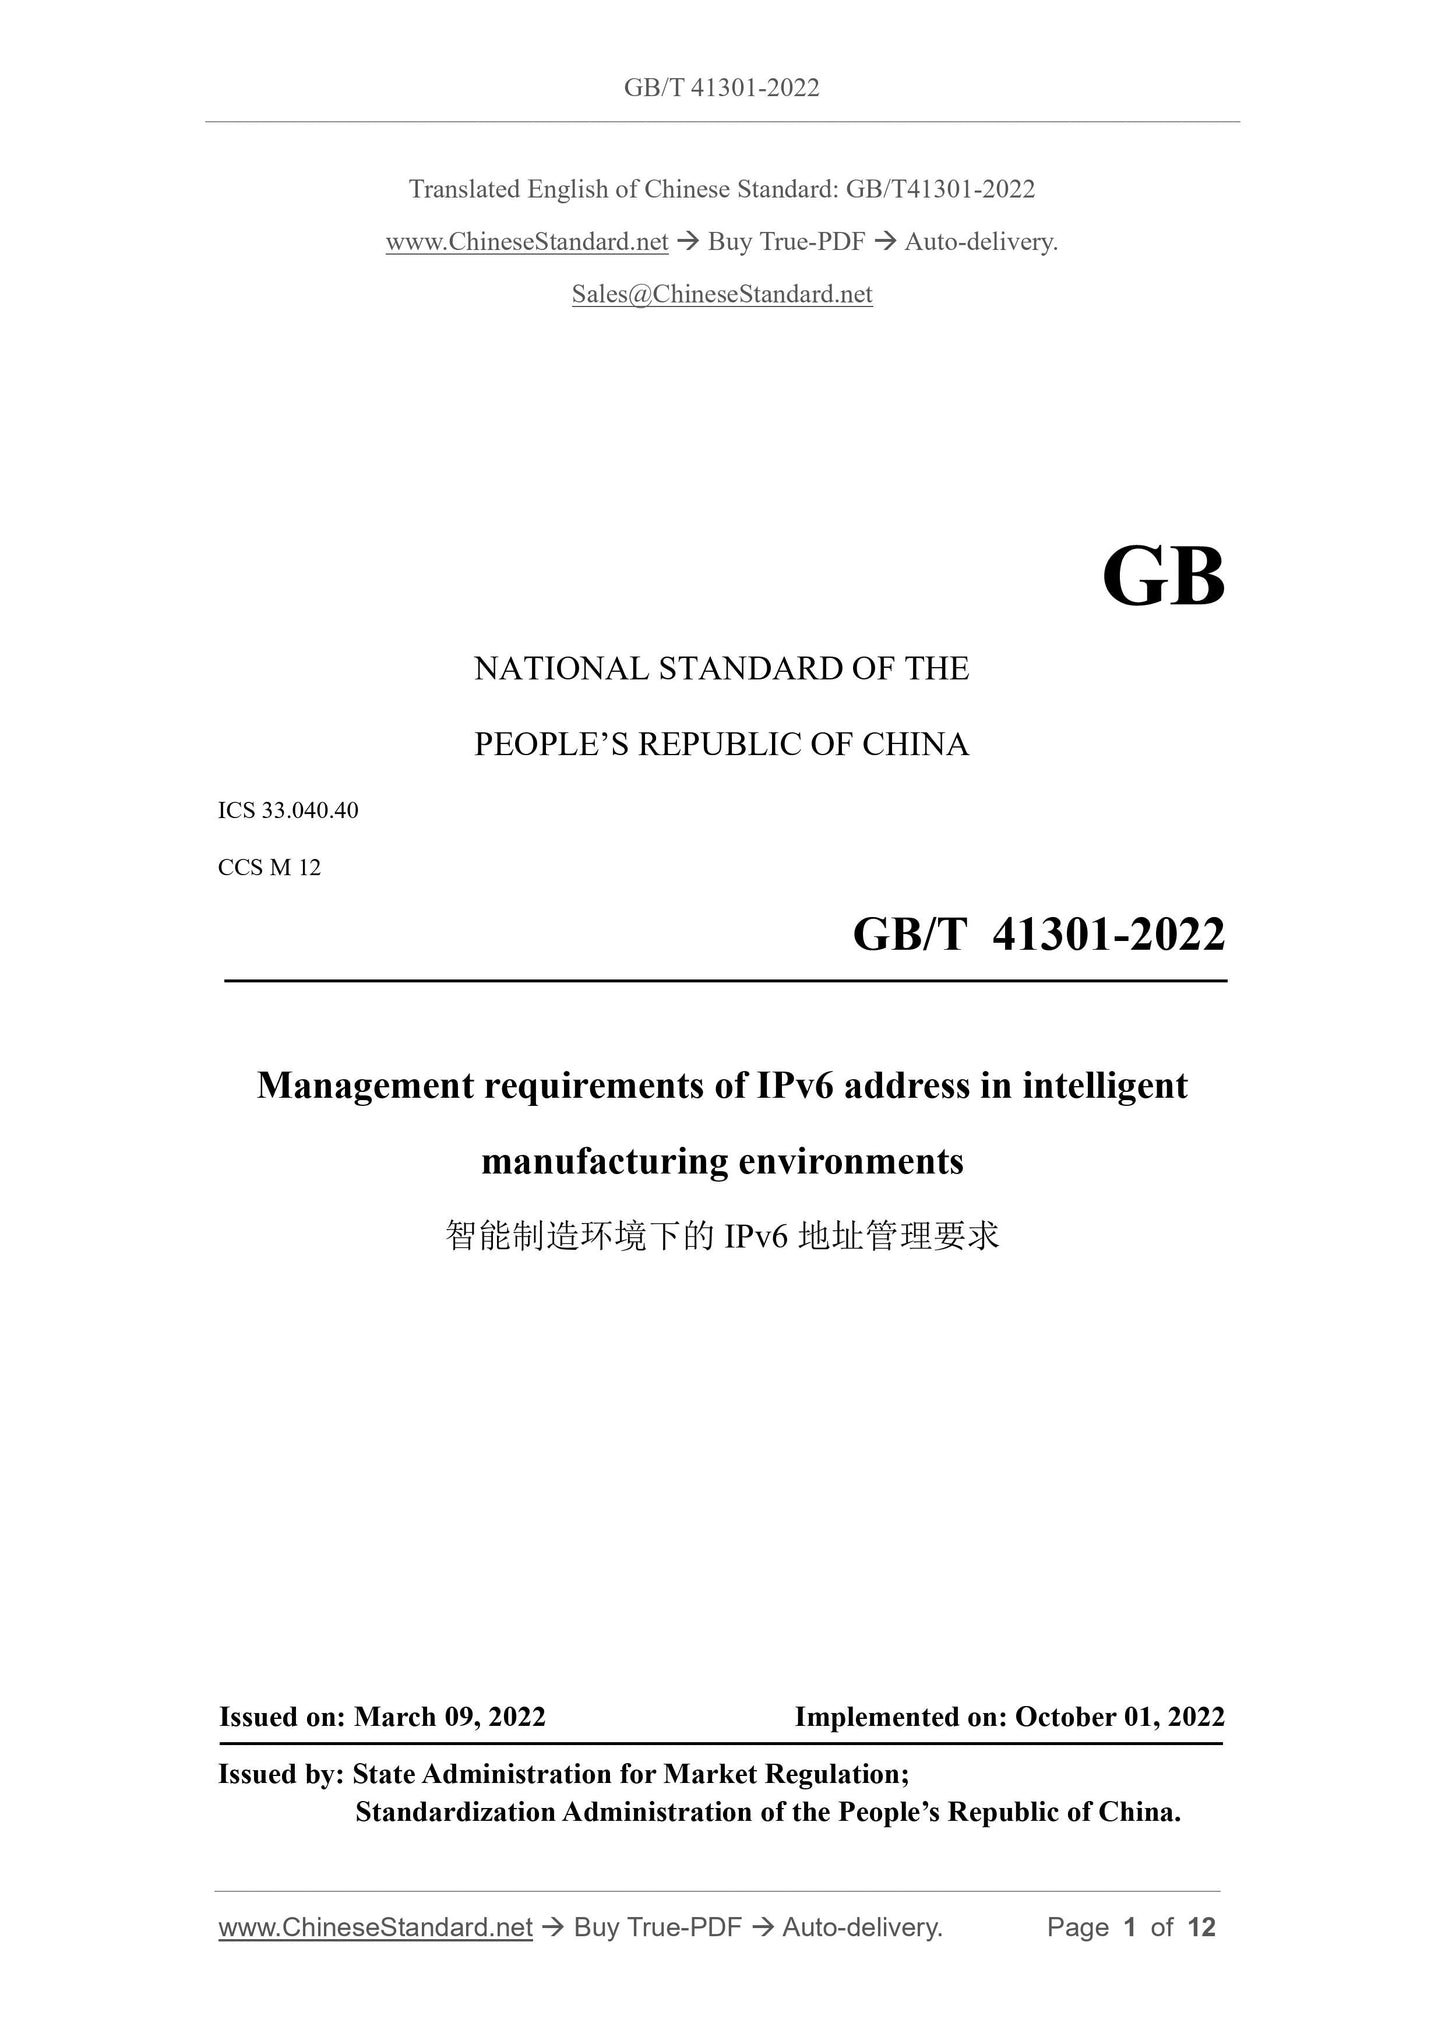 GB/T 41301-2022 Page 1